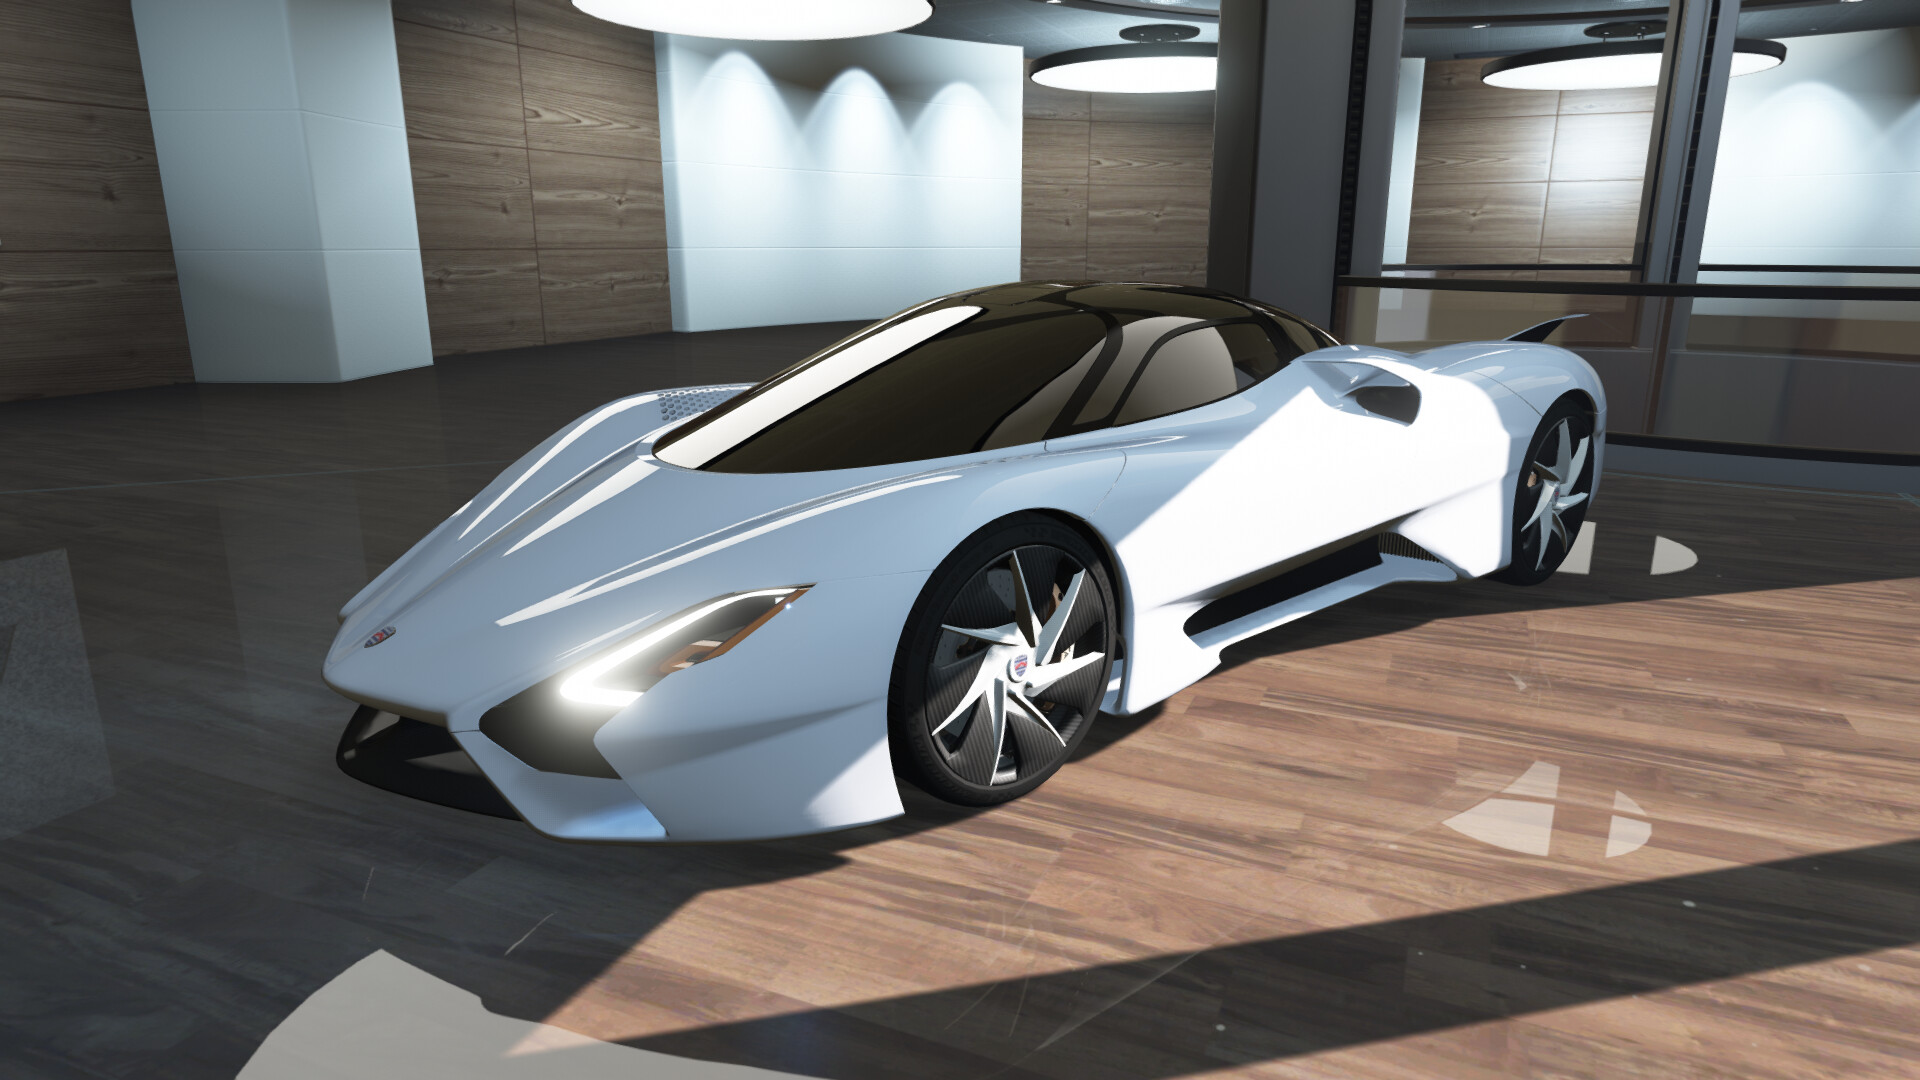 Ssc Tuatara Gta 5 Supercars Gallery Comment must not exceed 1000 characters. ssc tuatara gta 5 supercars gallery